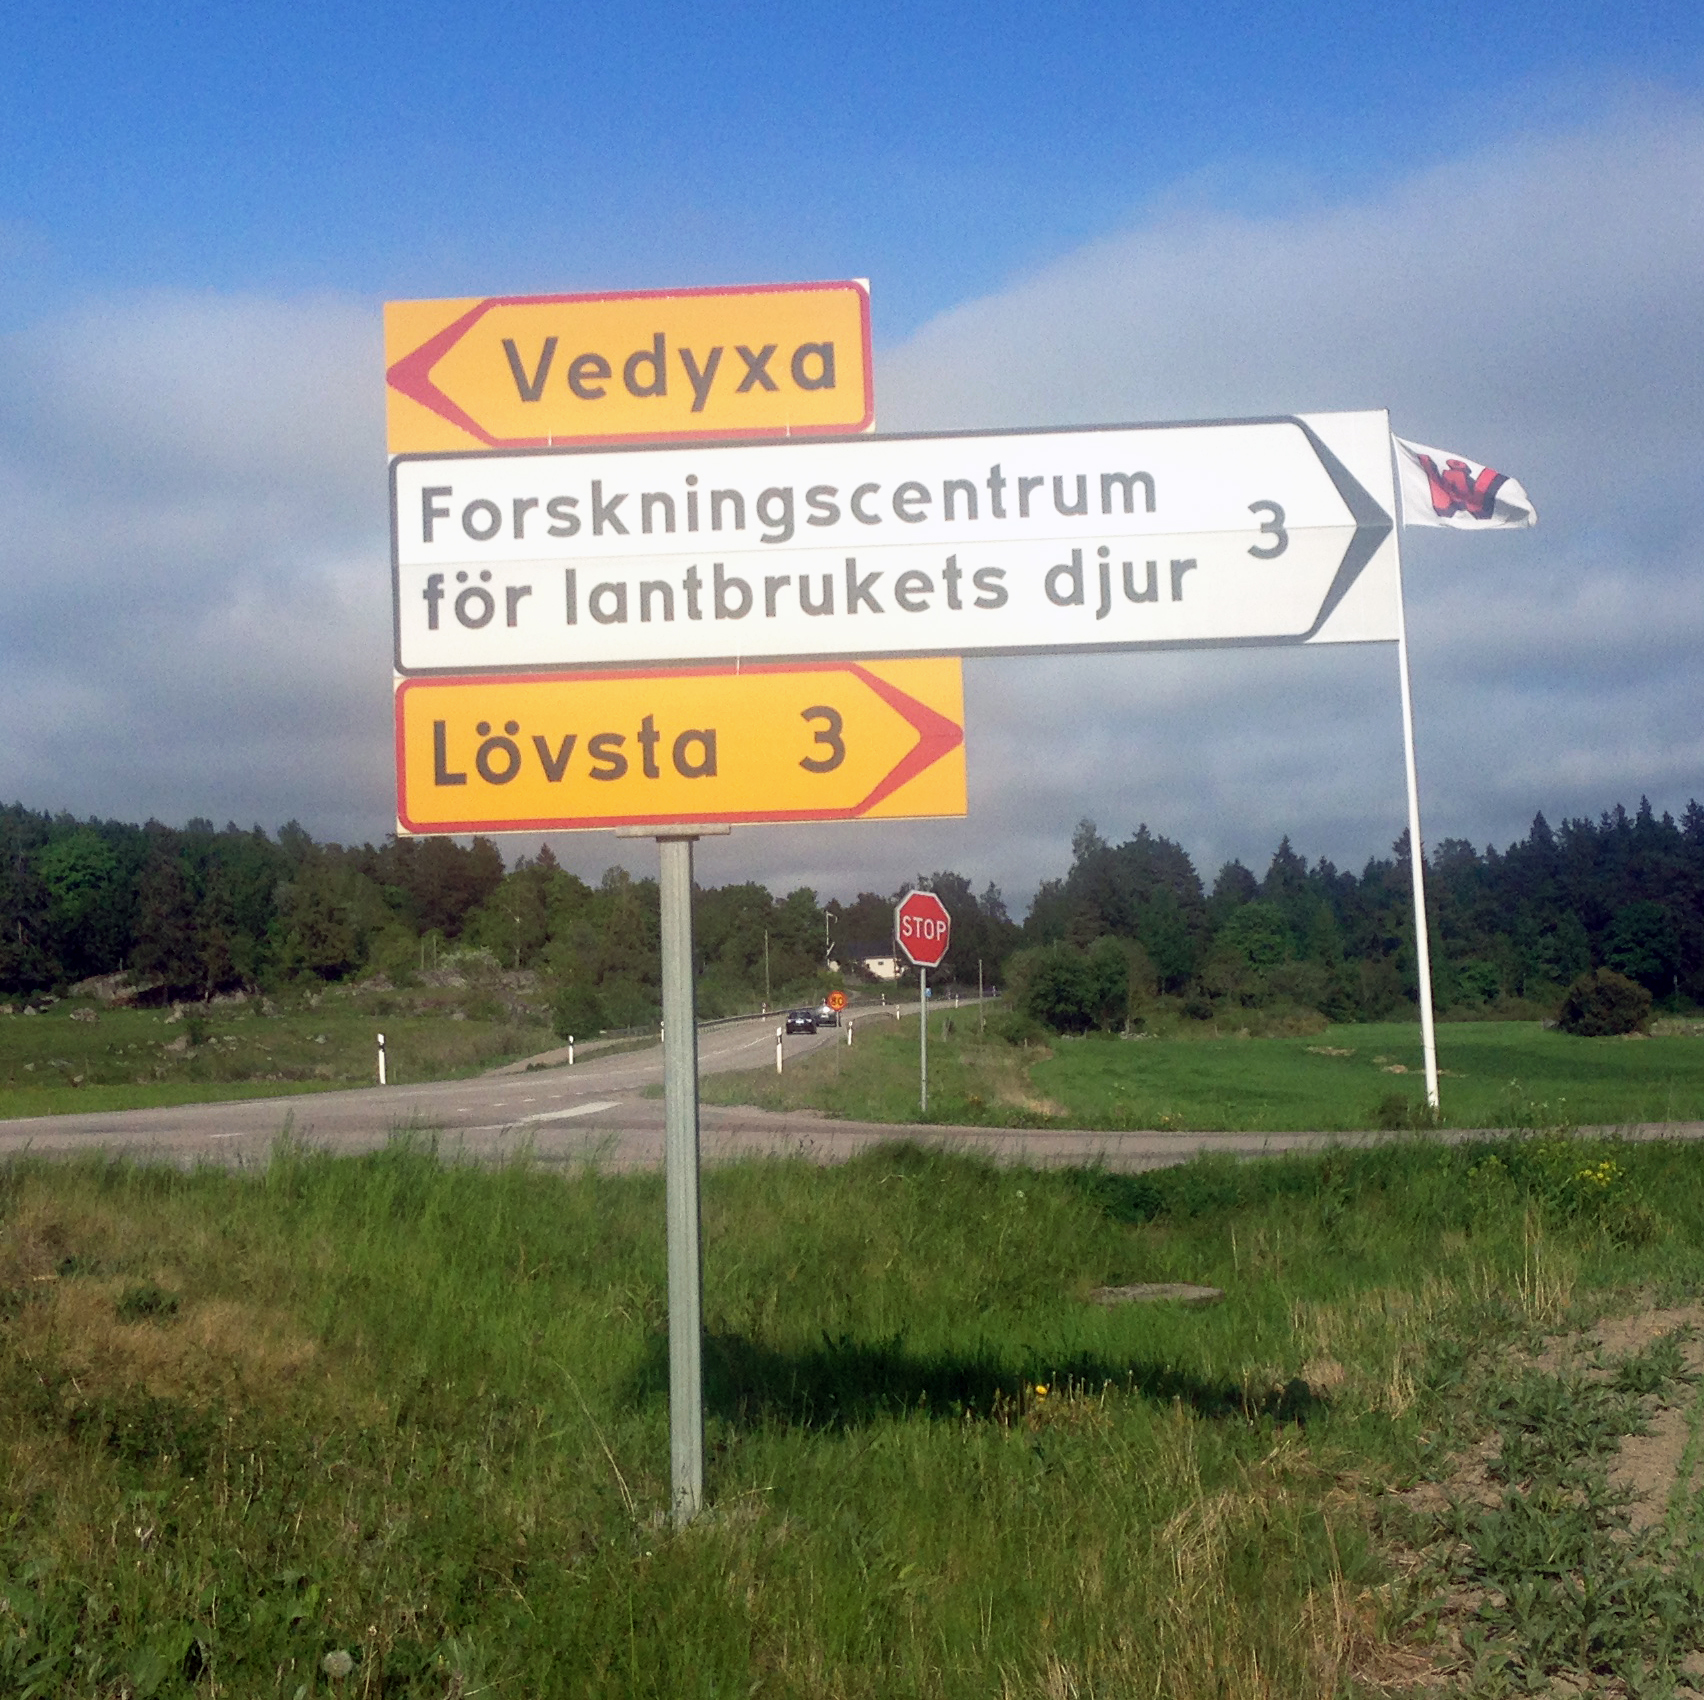 Road sign towards the Swedish Livestock Research Centre